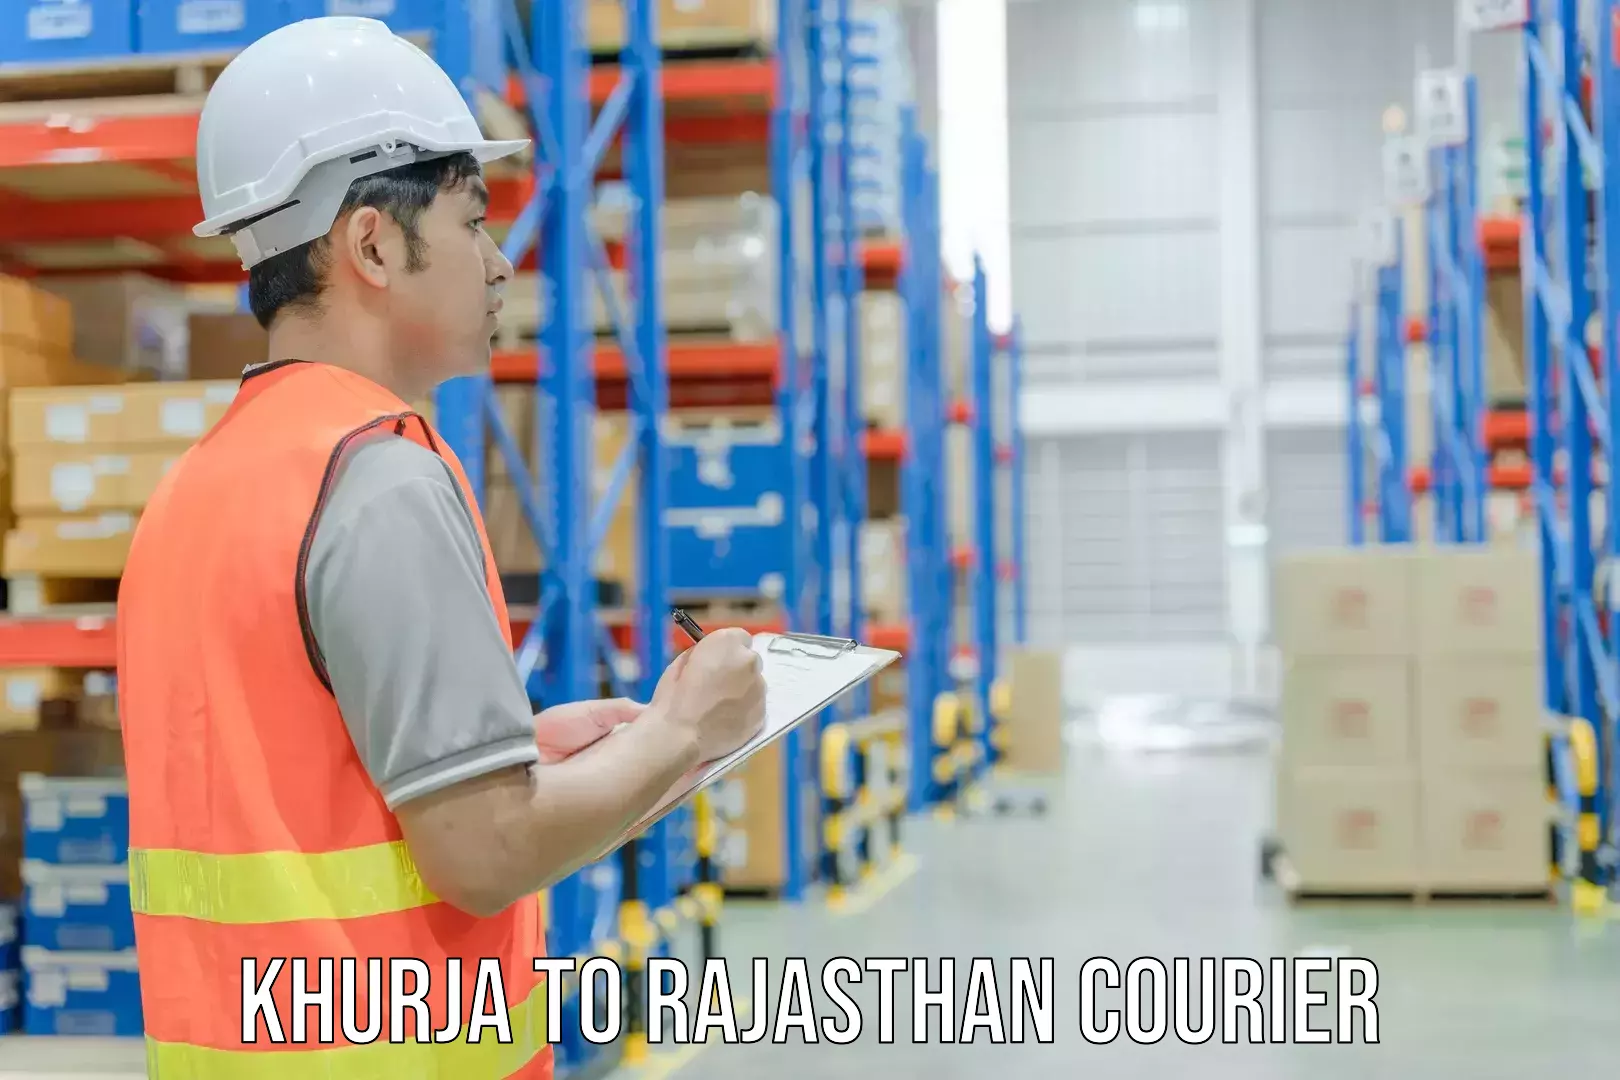 Next-day freight services Khurja to Rajasthan